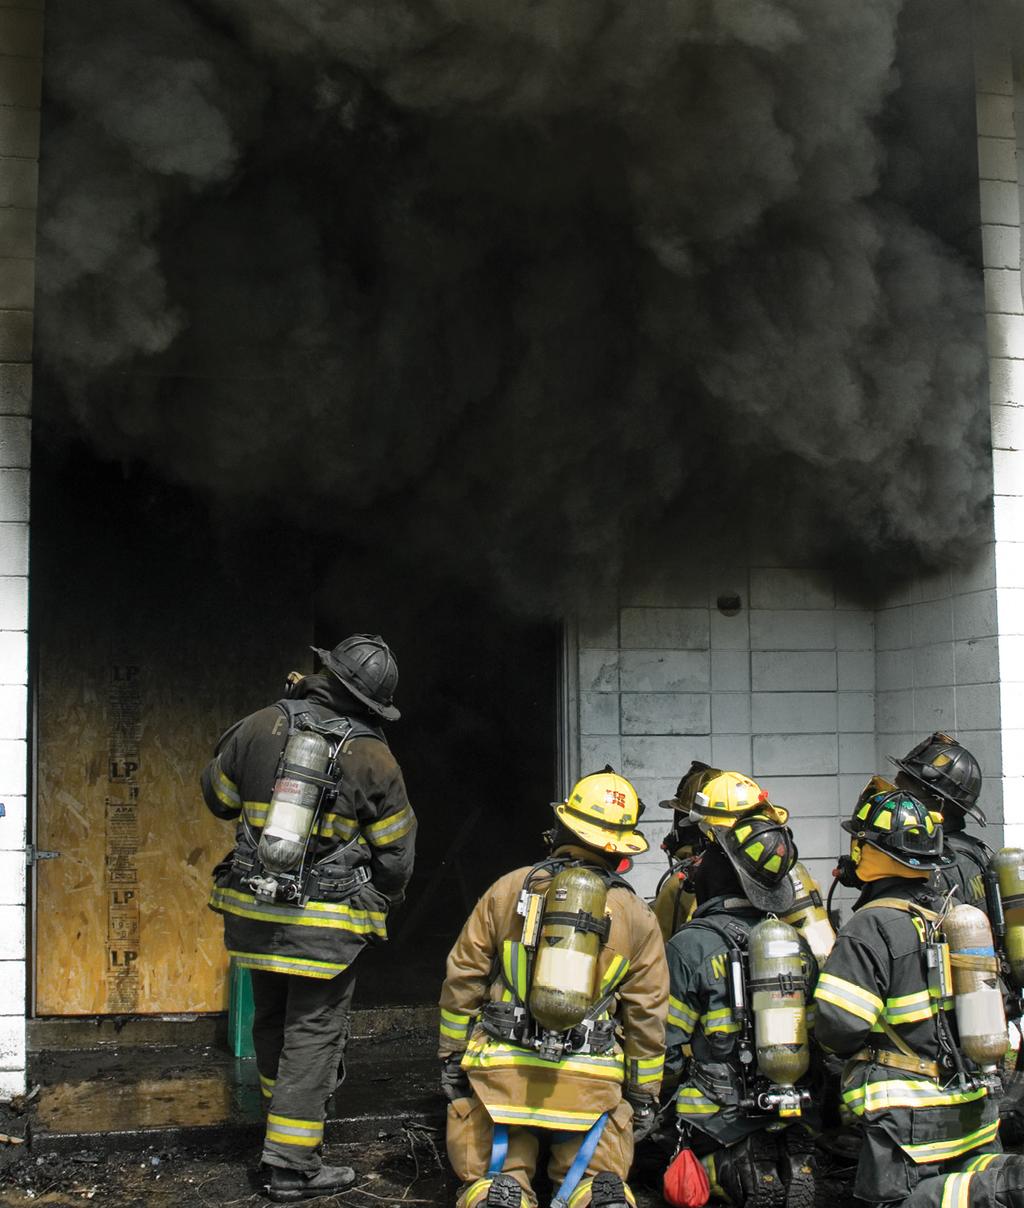 A New Way To Protect All Firefighters At All Times In-Command is